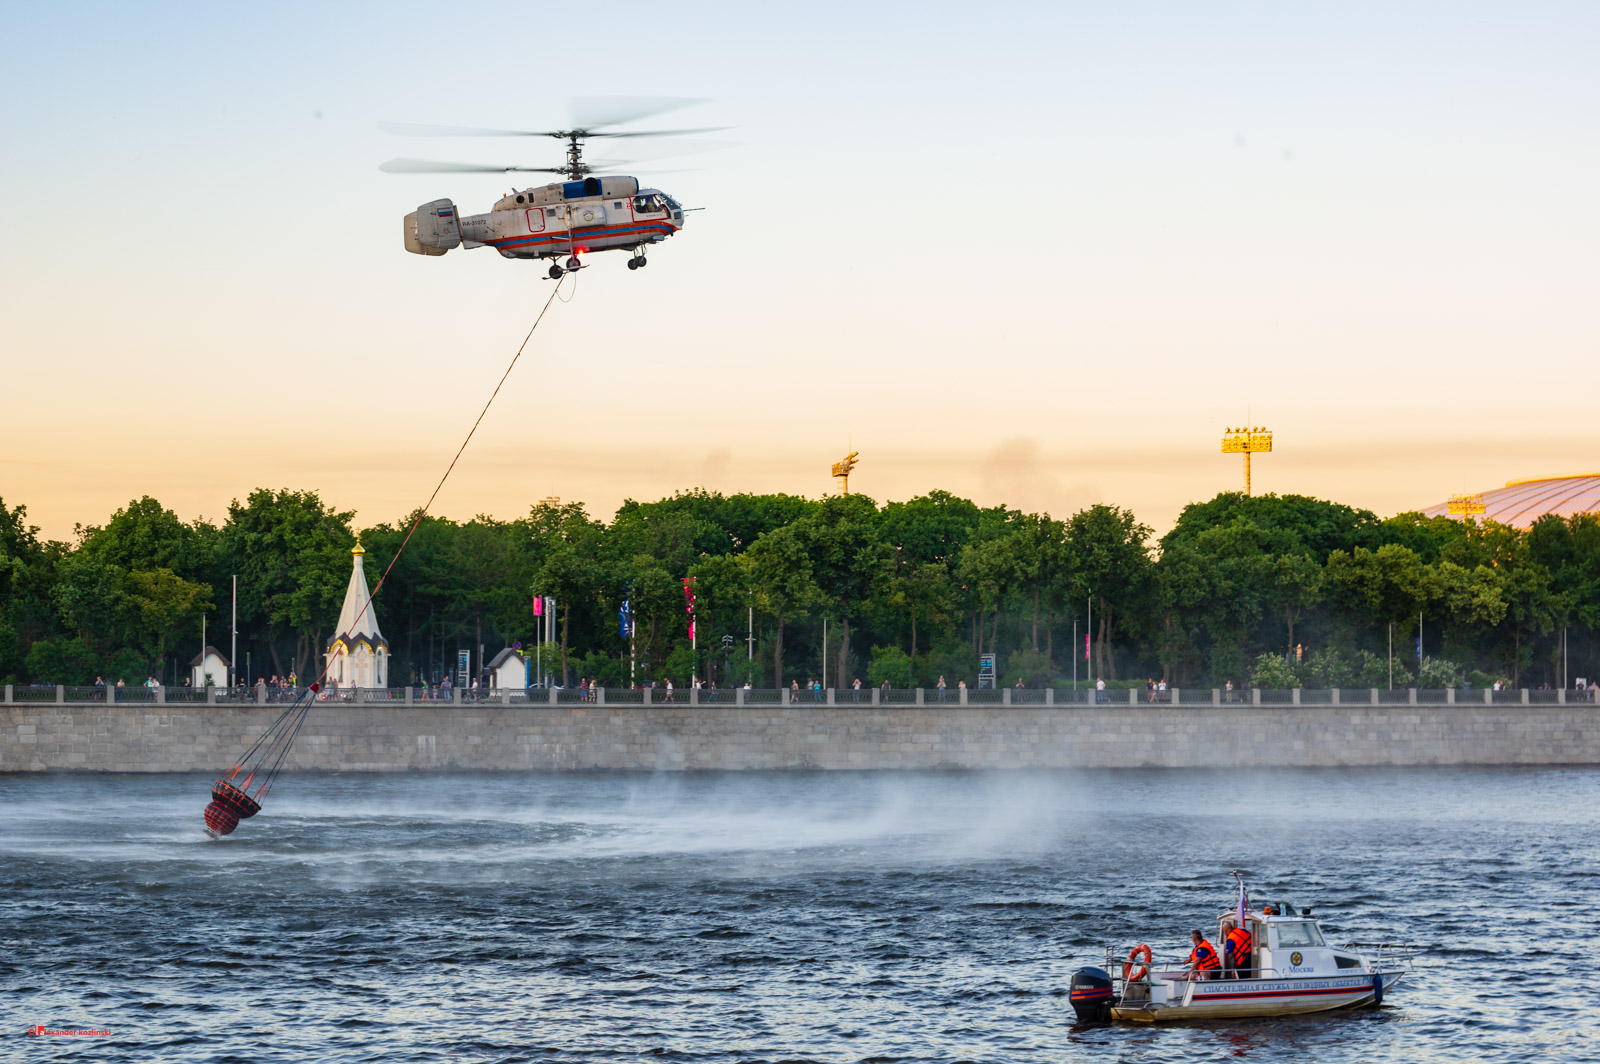 Helicopter takes water to extinguish the fire